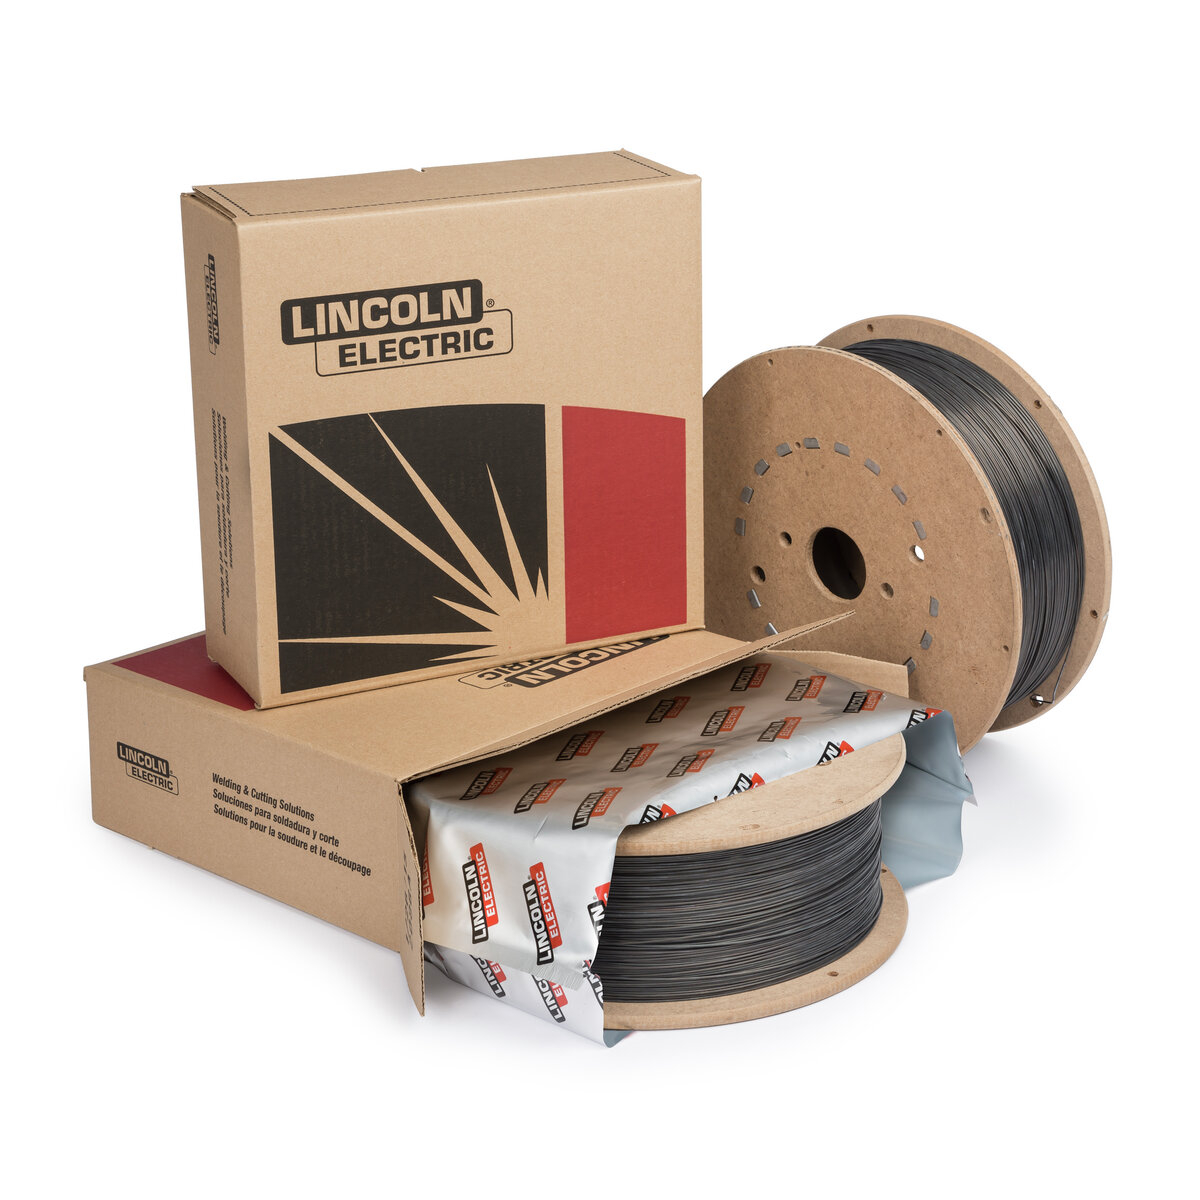 Lincoln Electric® Ultracore® 71C Carbon Steel Gas Shielded Tubular MIG Wire 71T Mild Steel 0.0450in 33LB Spool